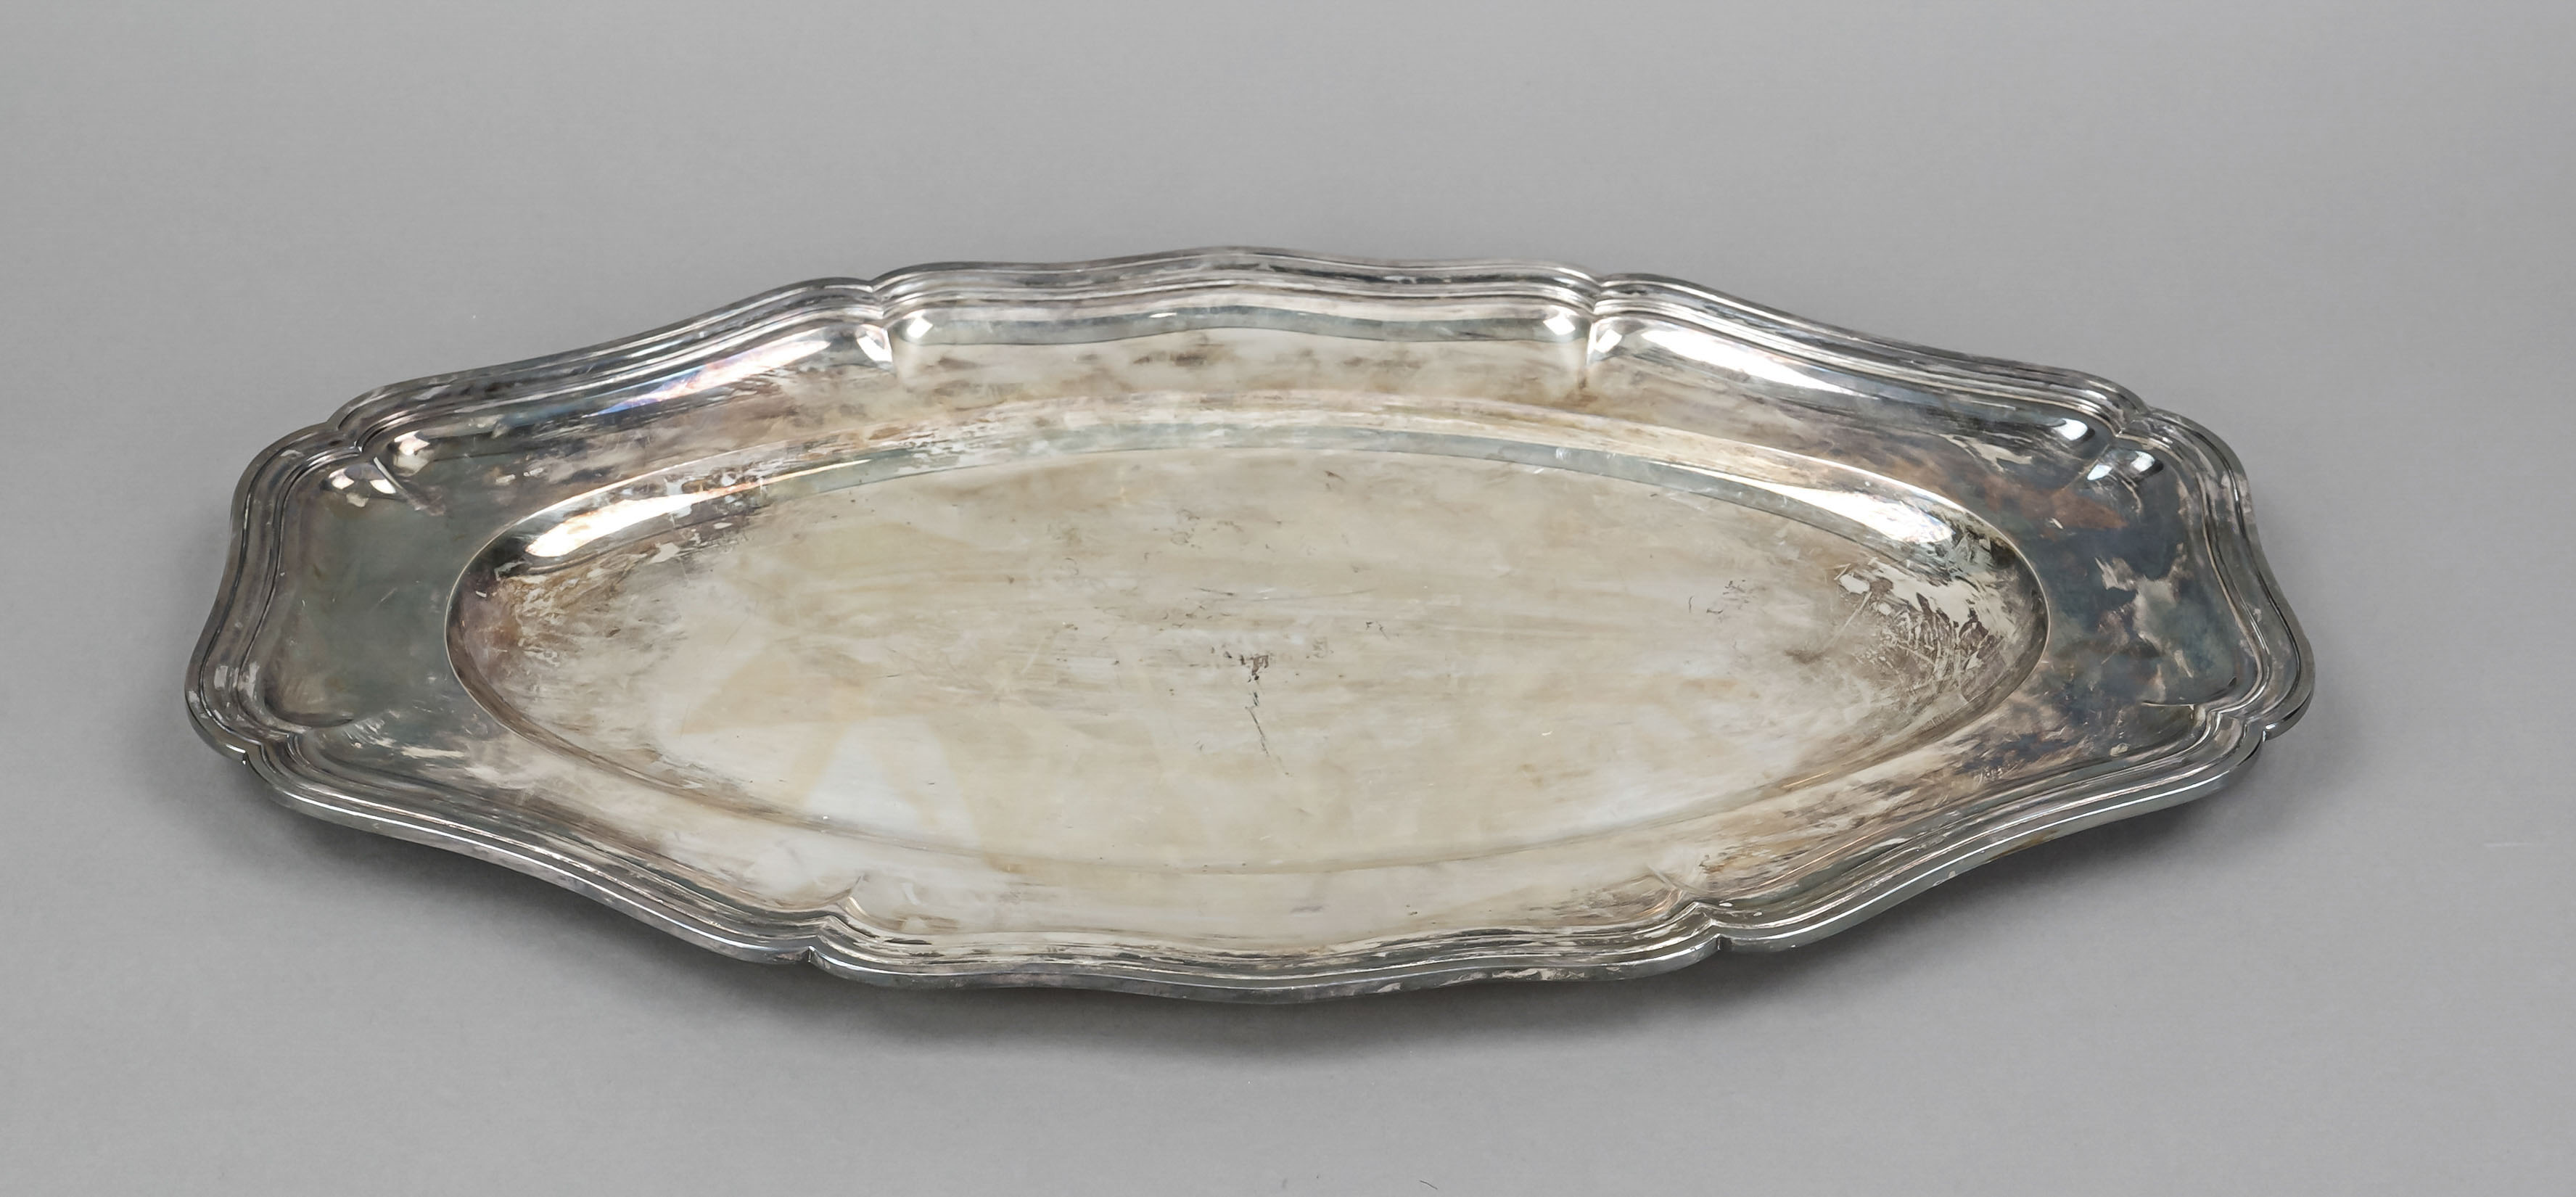 Oval tray, 20th century, silver tested, of curved form with profiled rim, l. 51 cm, approx. 1100 g